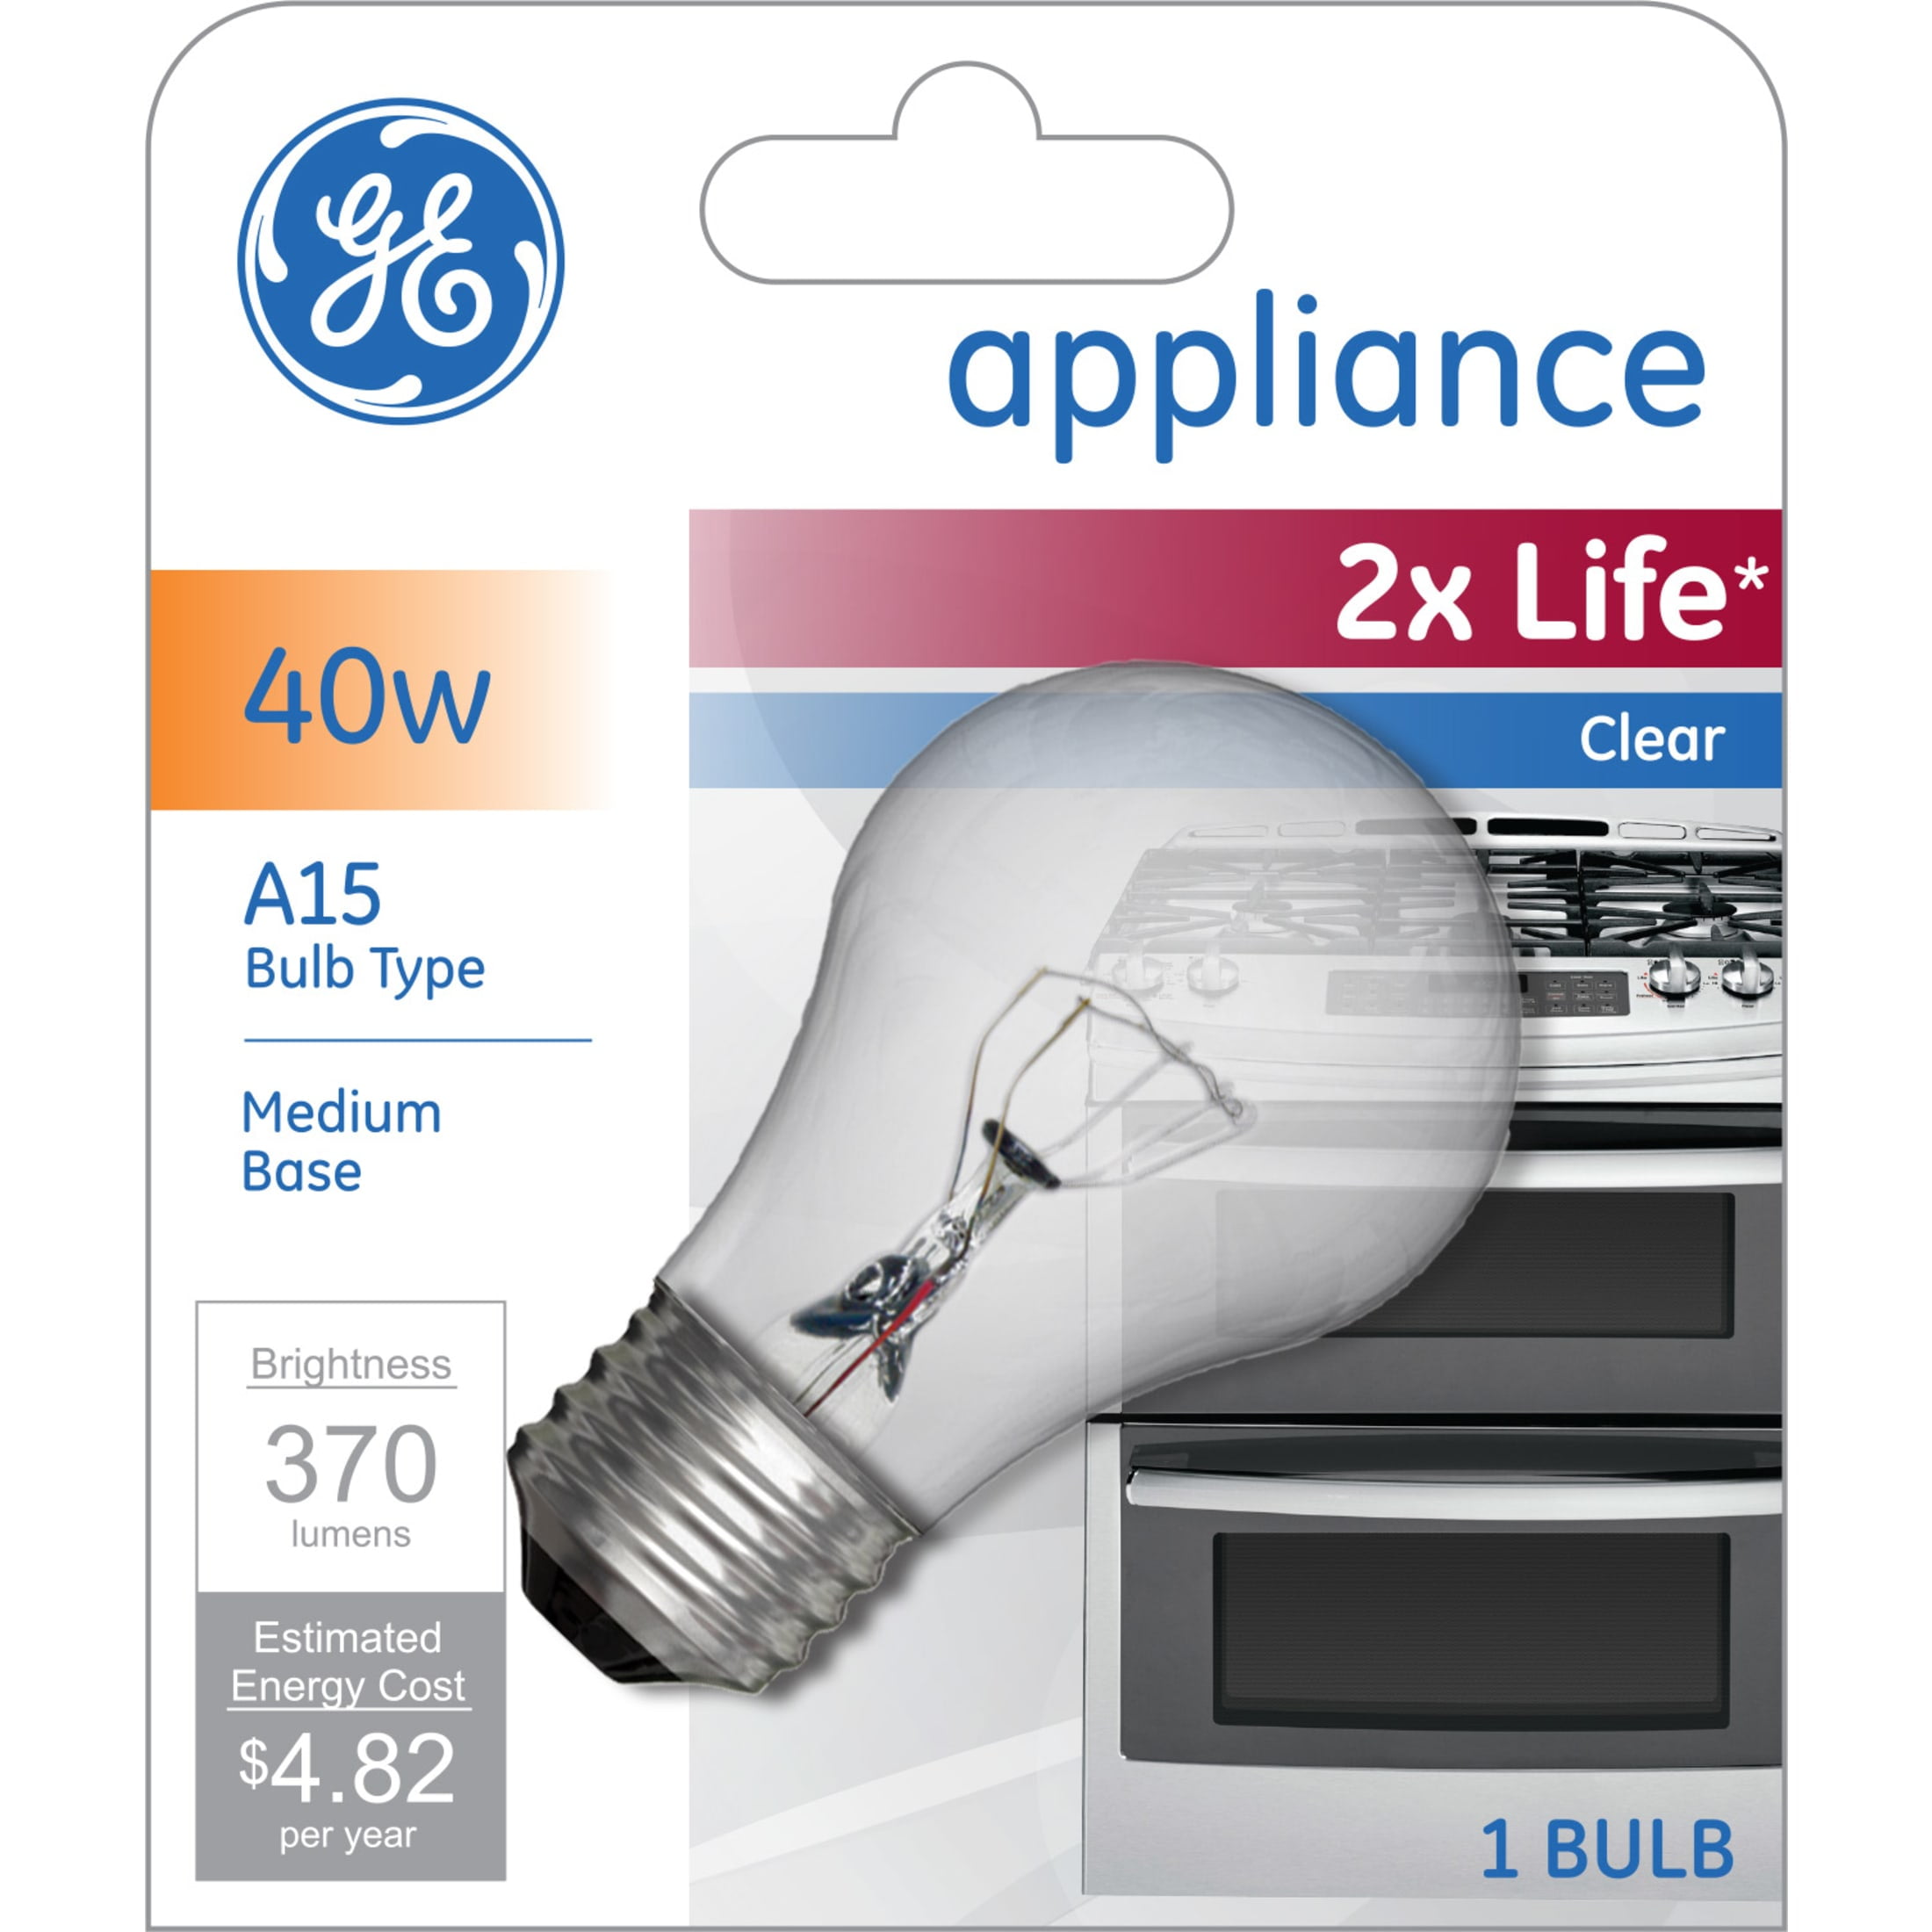 Two GE Appliance - A15 40W BULBS REFRIGERATOR OVEN MICROWAVE